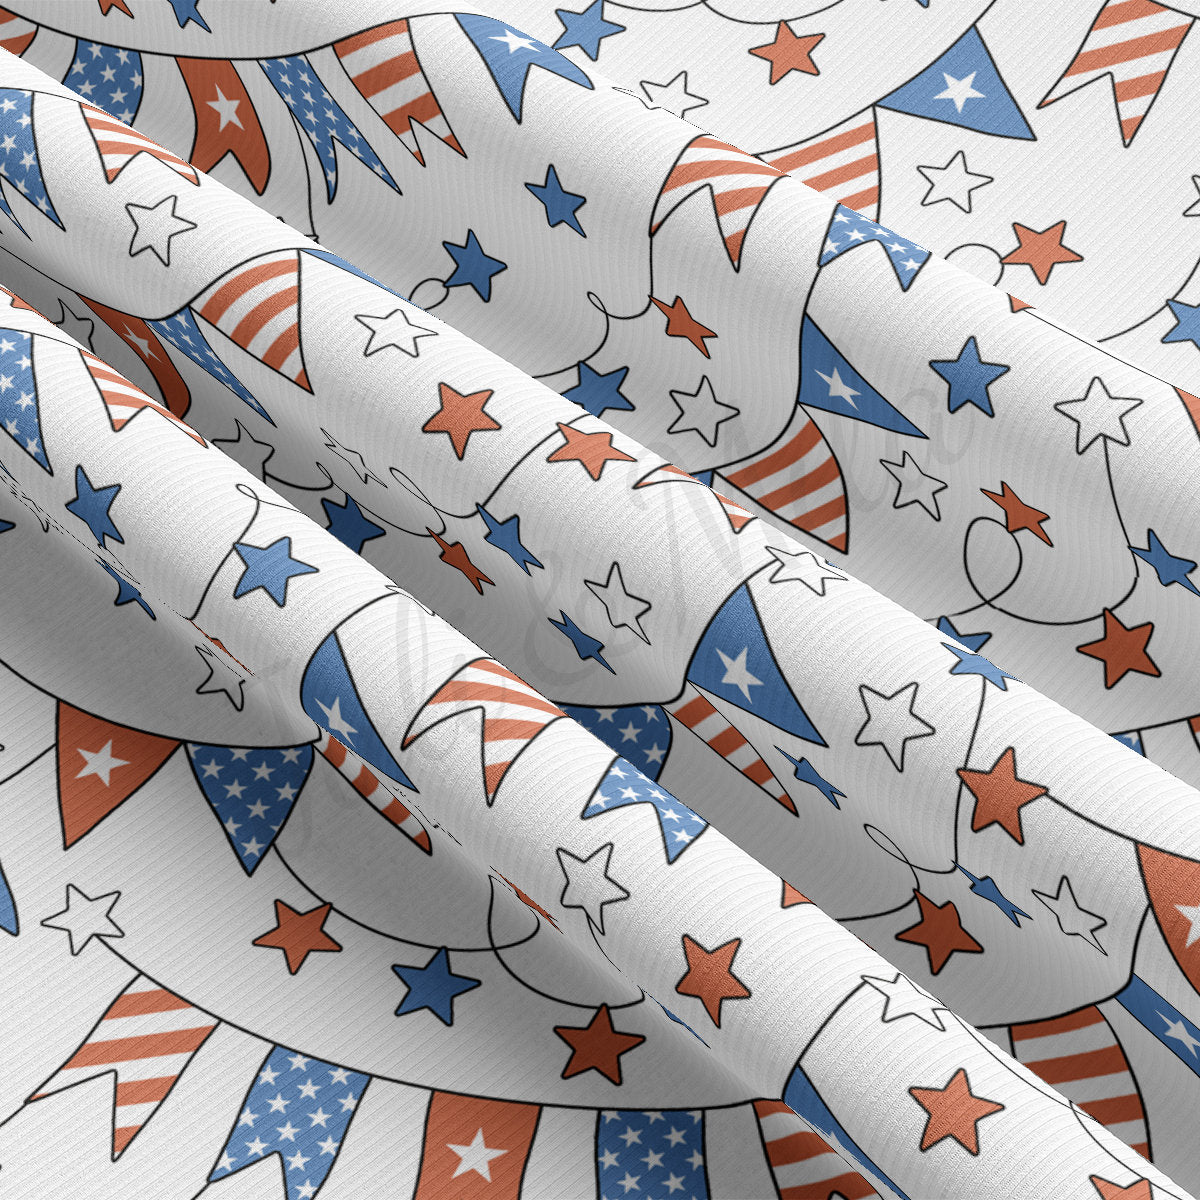 4th of July Patriotic Rib Knit Fabric by the Yard Ribbed Jersey Stretchy Soft Polyester Stretch Fabric 1 Yard  RBK2189